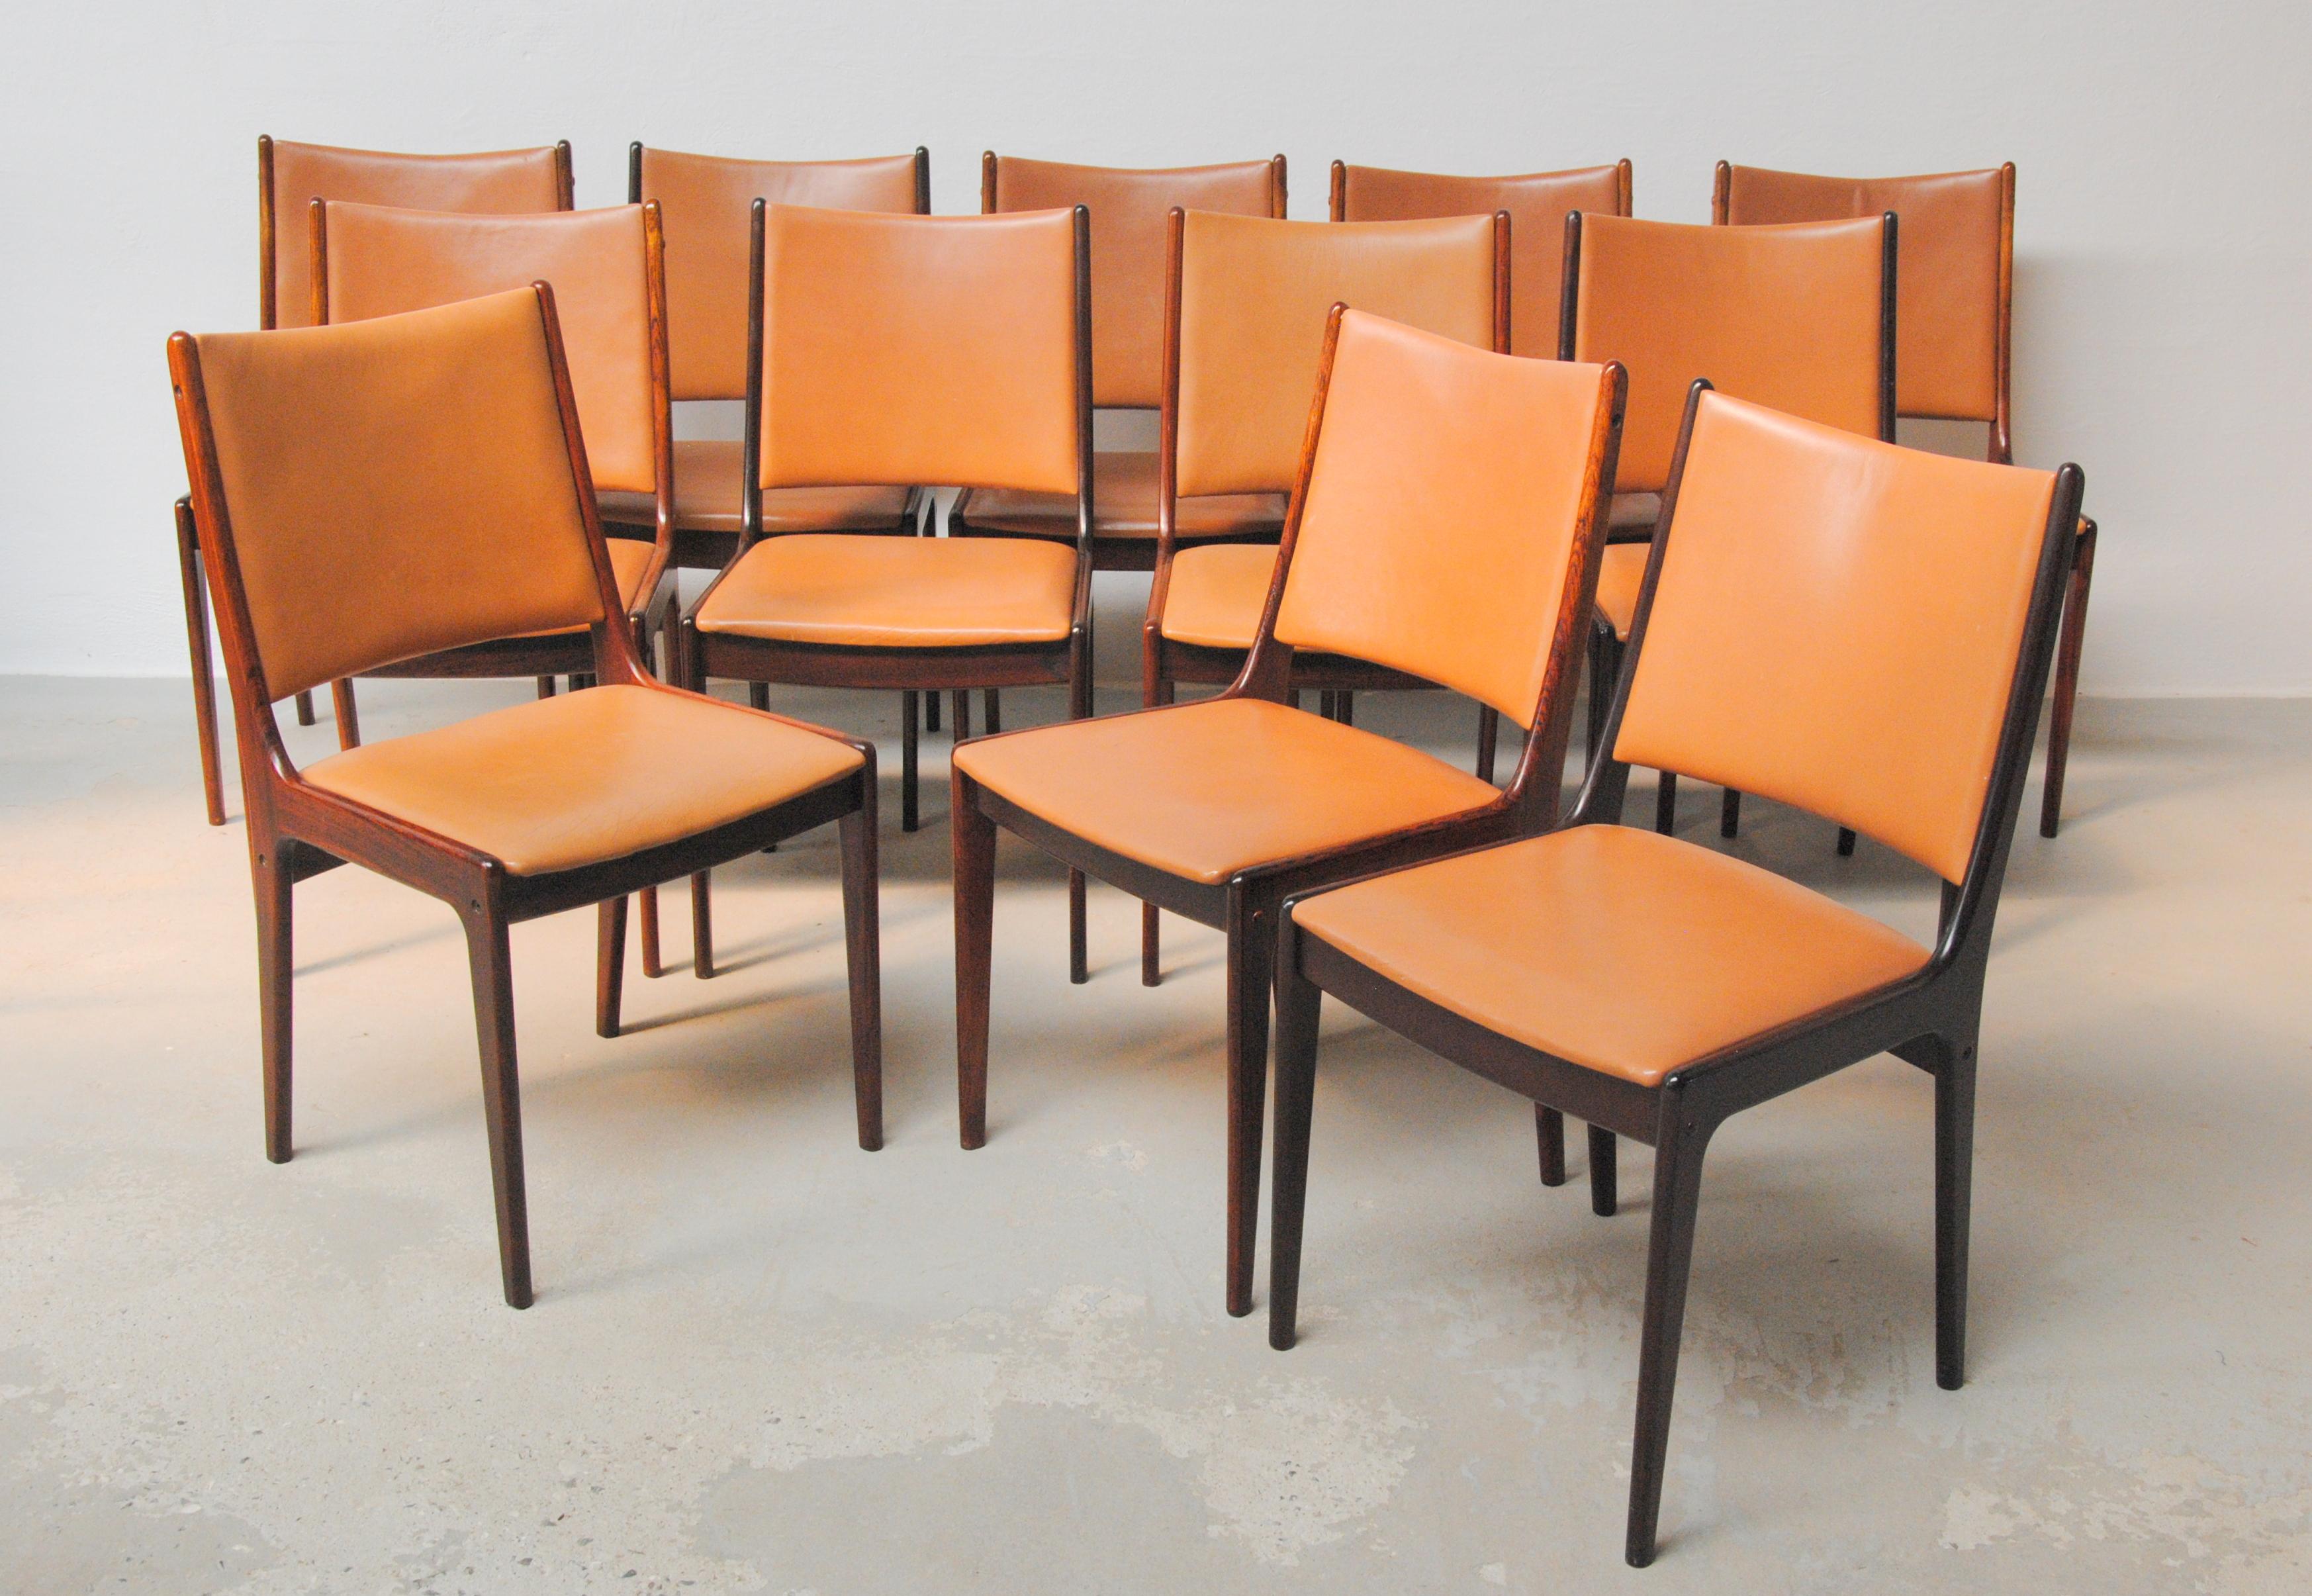 Set of twelve fully restored 1960s Johannes Andersen dining chairs in rosewood made by Uldum Møbler, Denmark.

The set of dining chairs feature a clean simple yet elegant design that will fit in well in most houses. 

The chairs have been fully